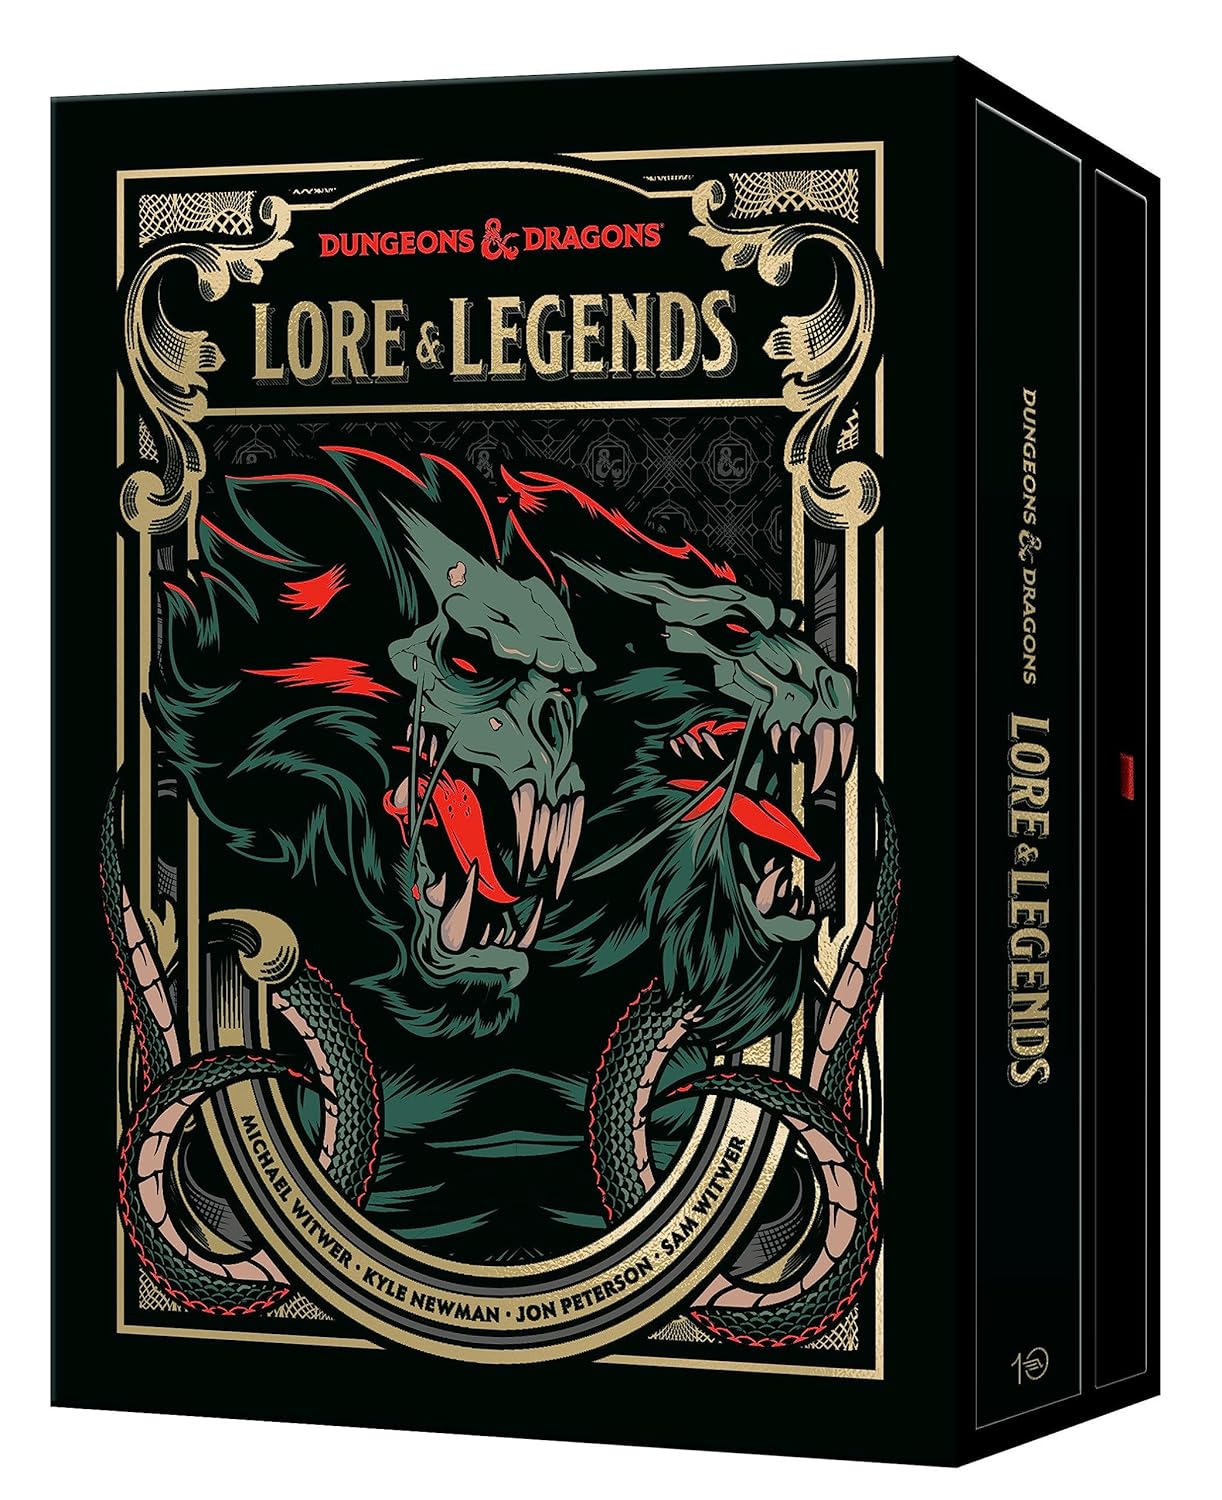 DnD Lore and Legends special edition cover.jpg